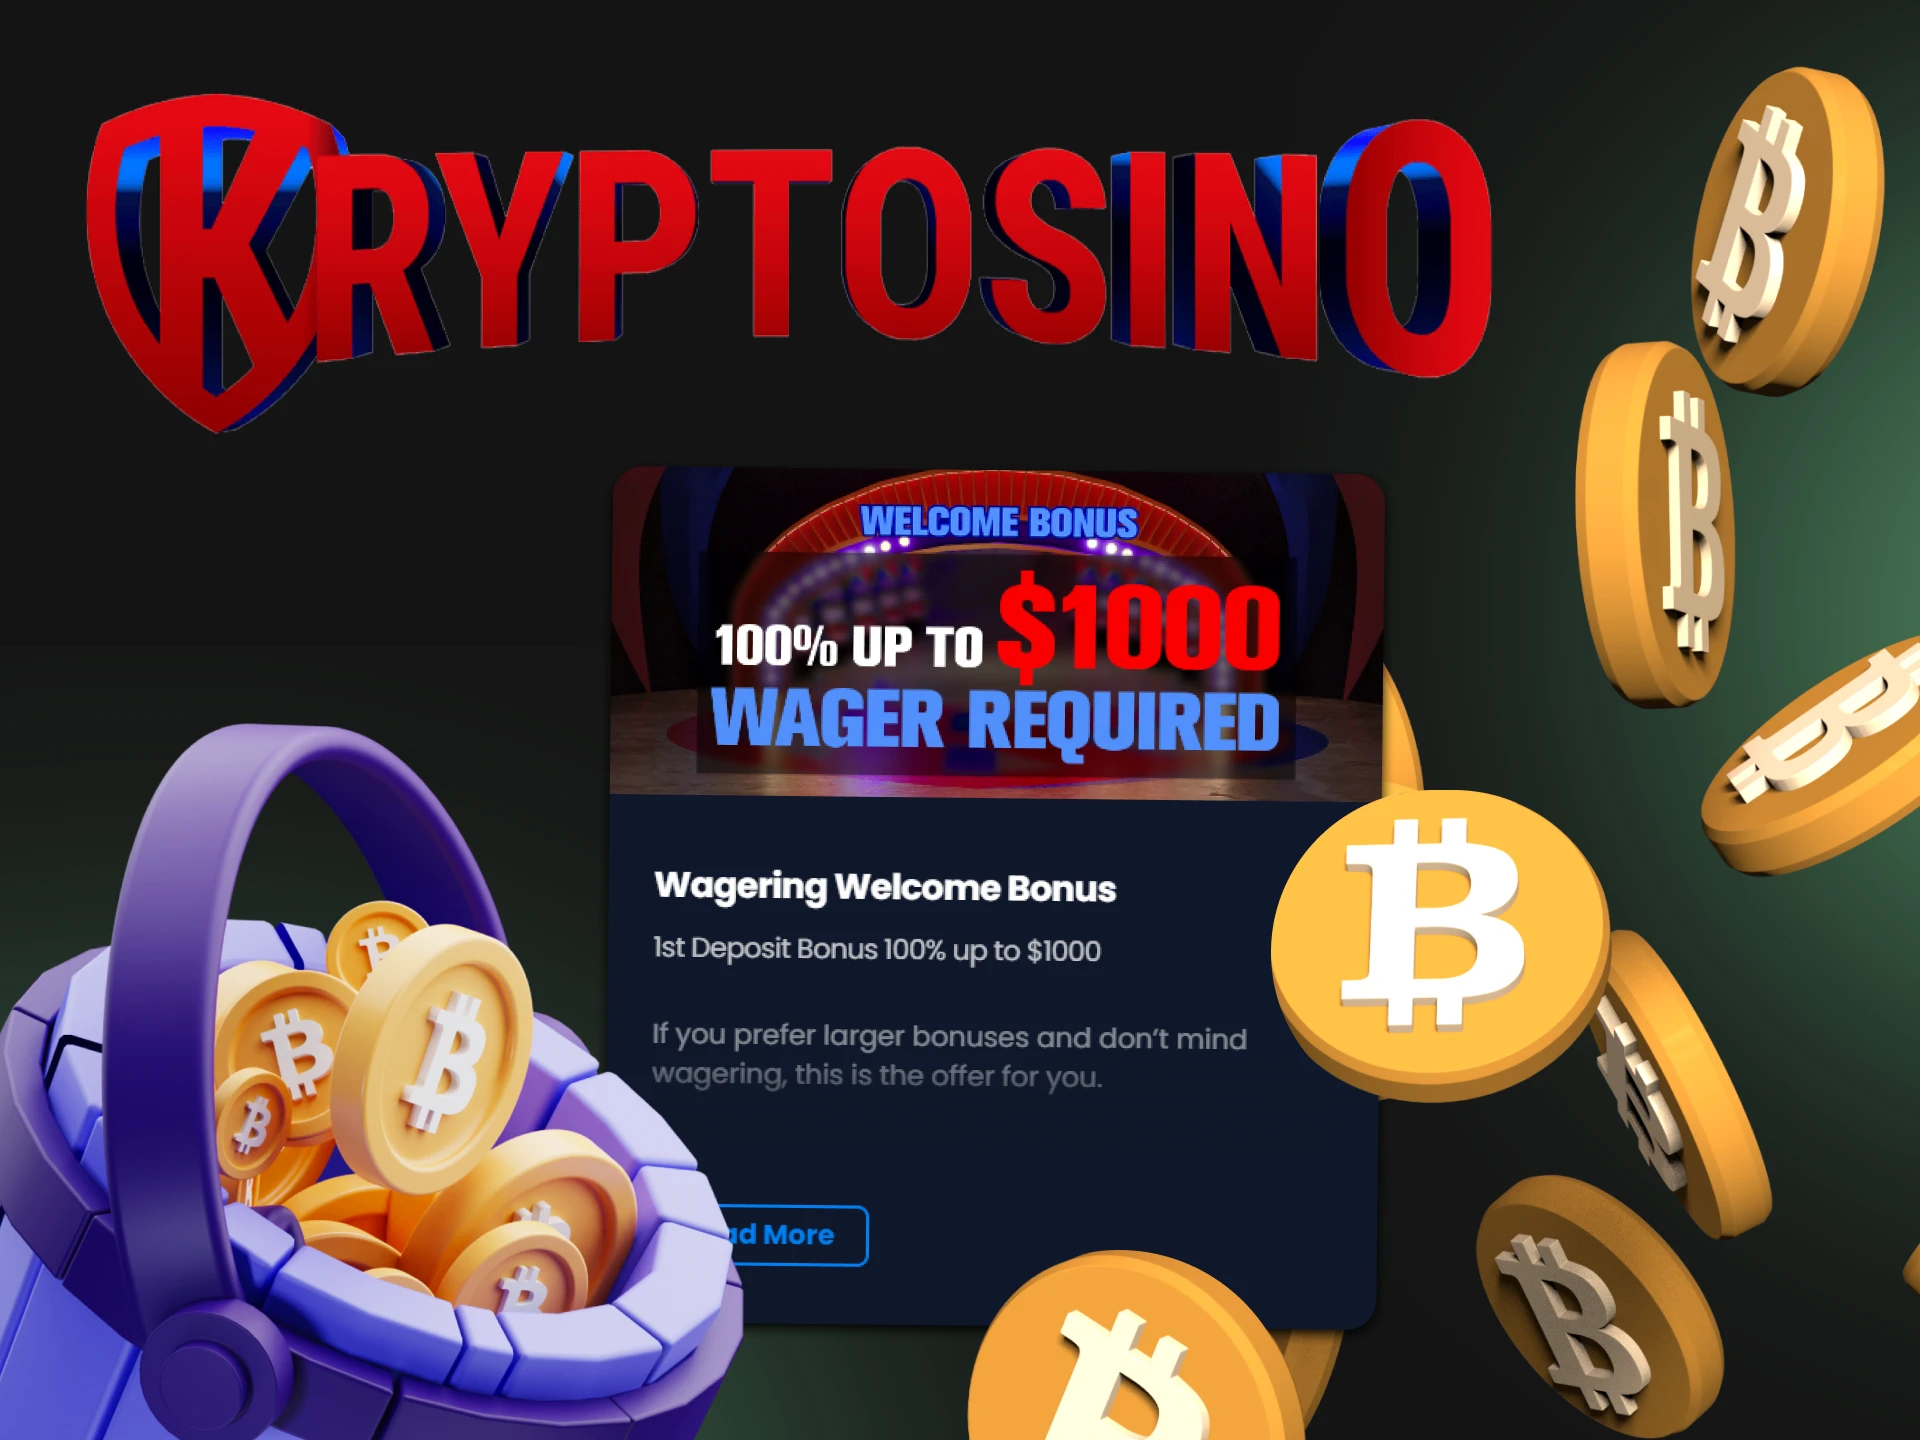 Kryptosino offers a nice bonus system that will appeal to all newcomers.